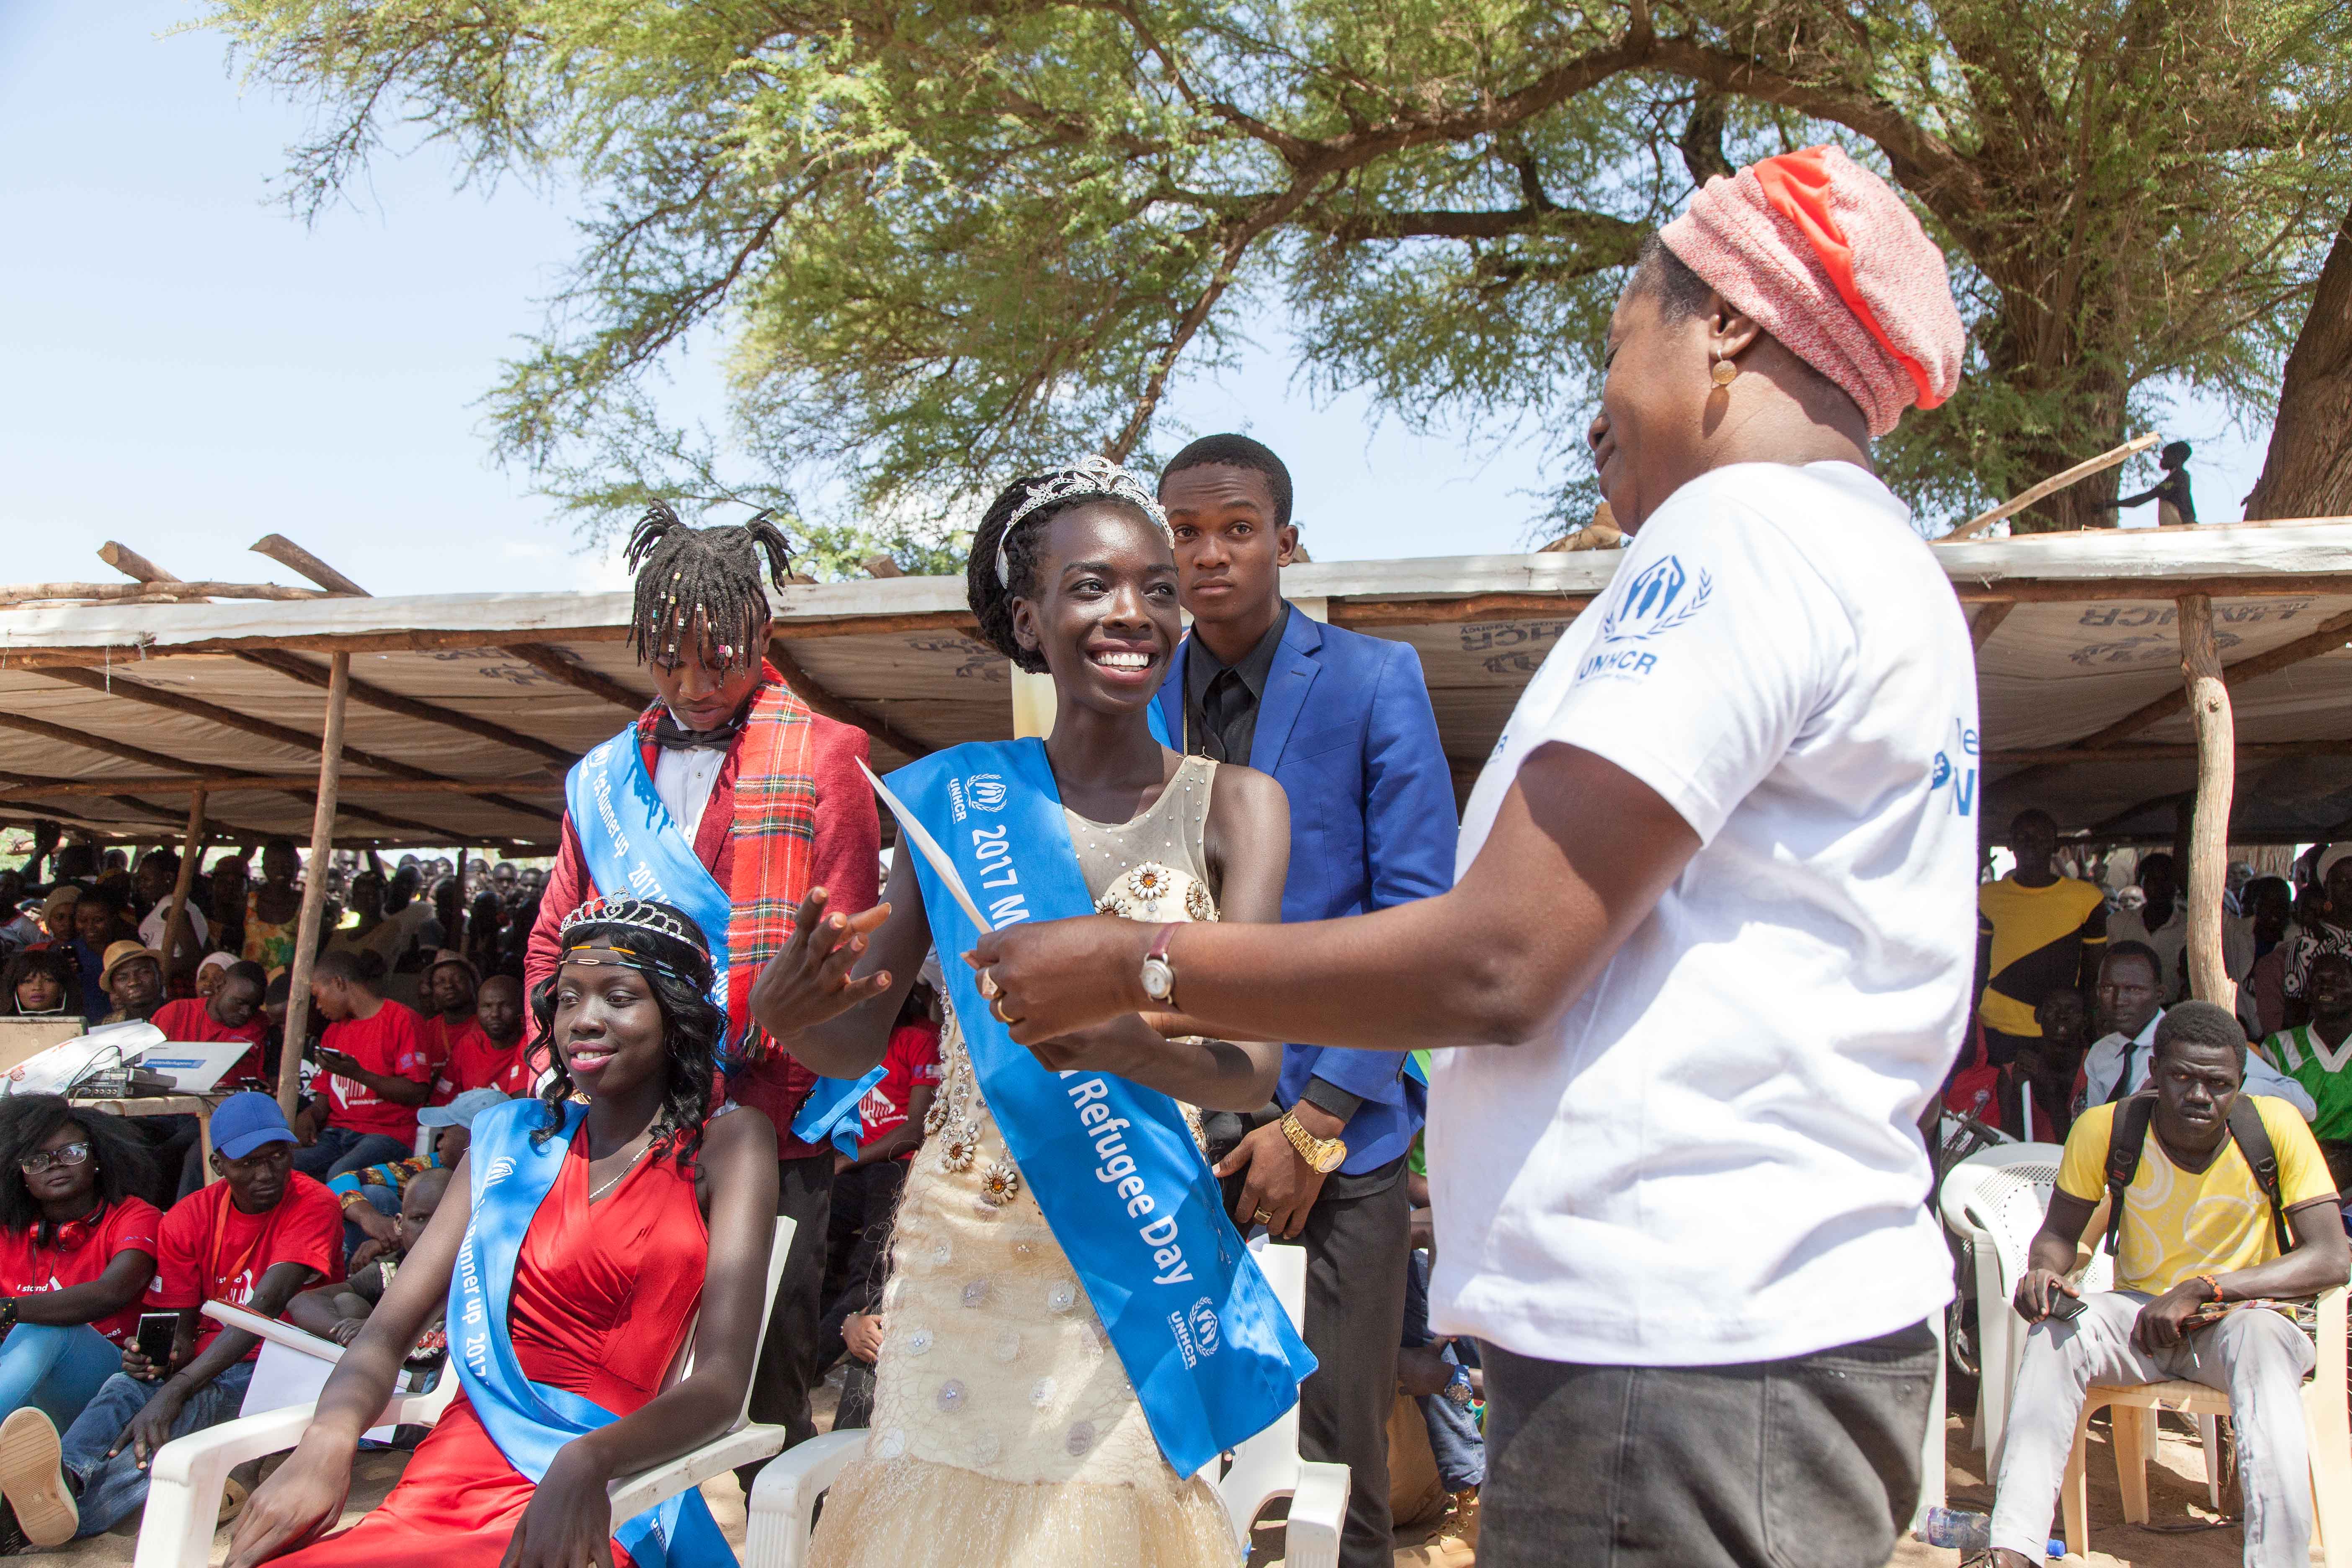 New Mr. and Miss World Refugee Day Crowned in Kakuma Refugee Camp